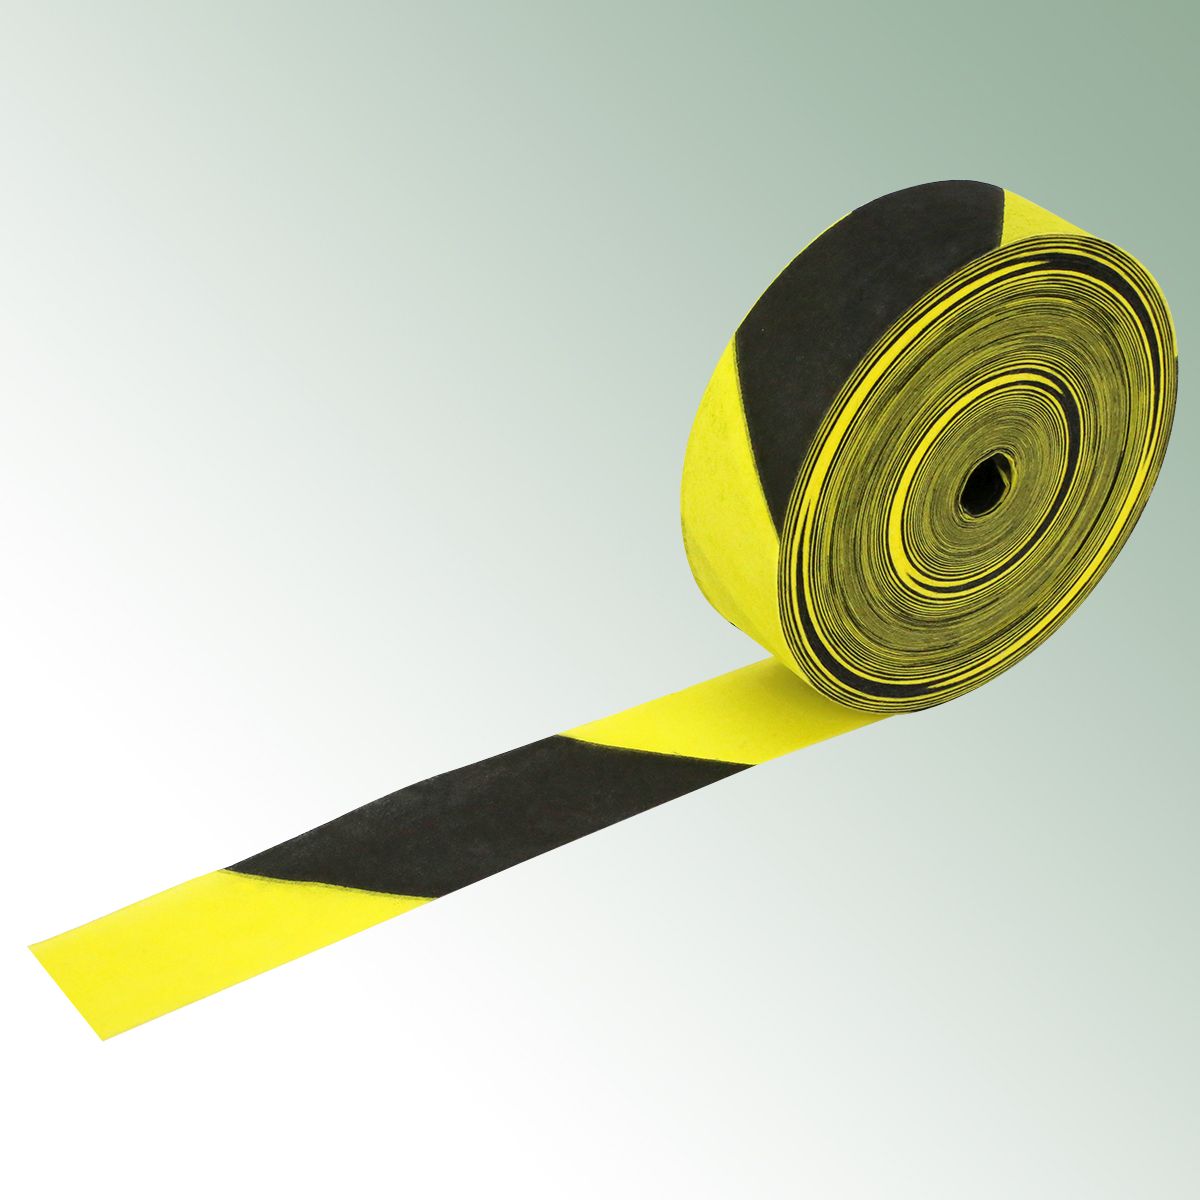 Marking Tape from Pulp - Black/Yellow